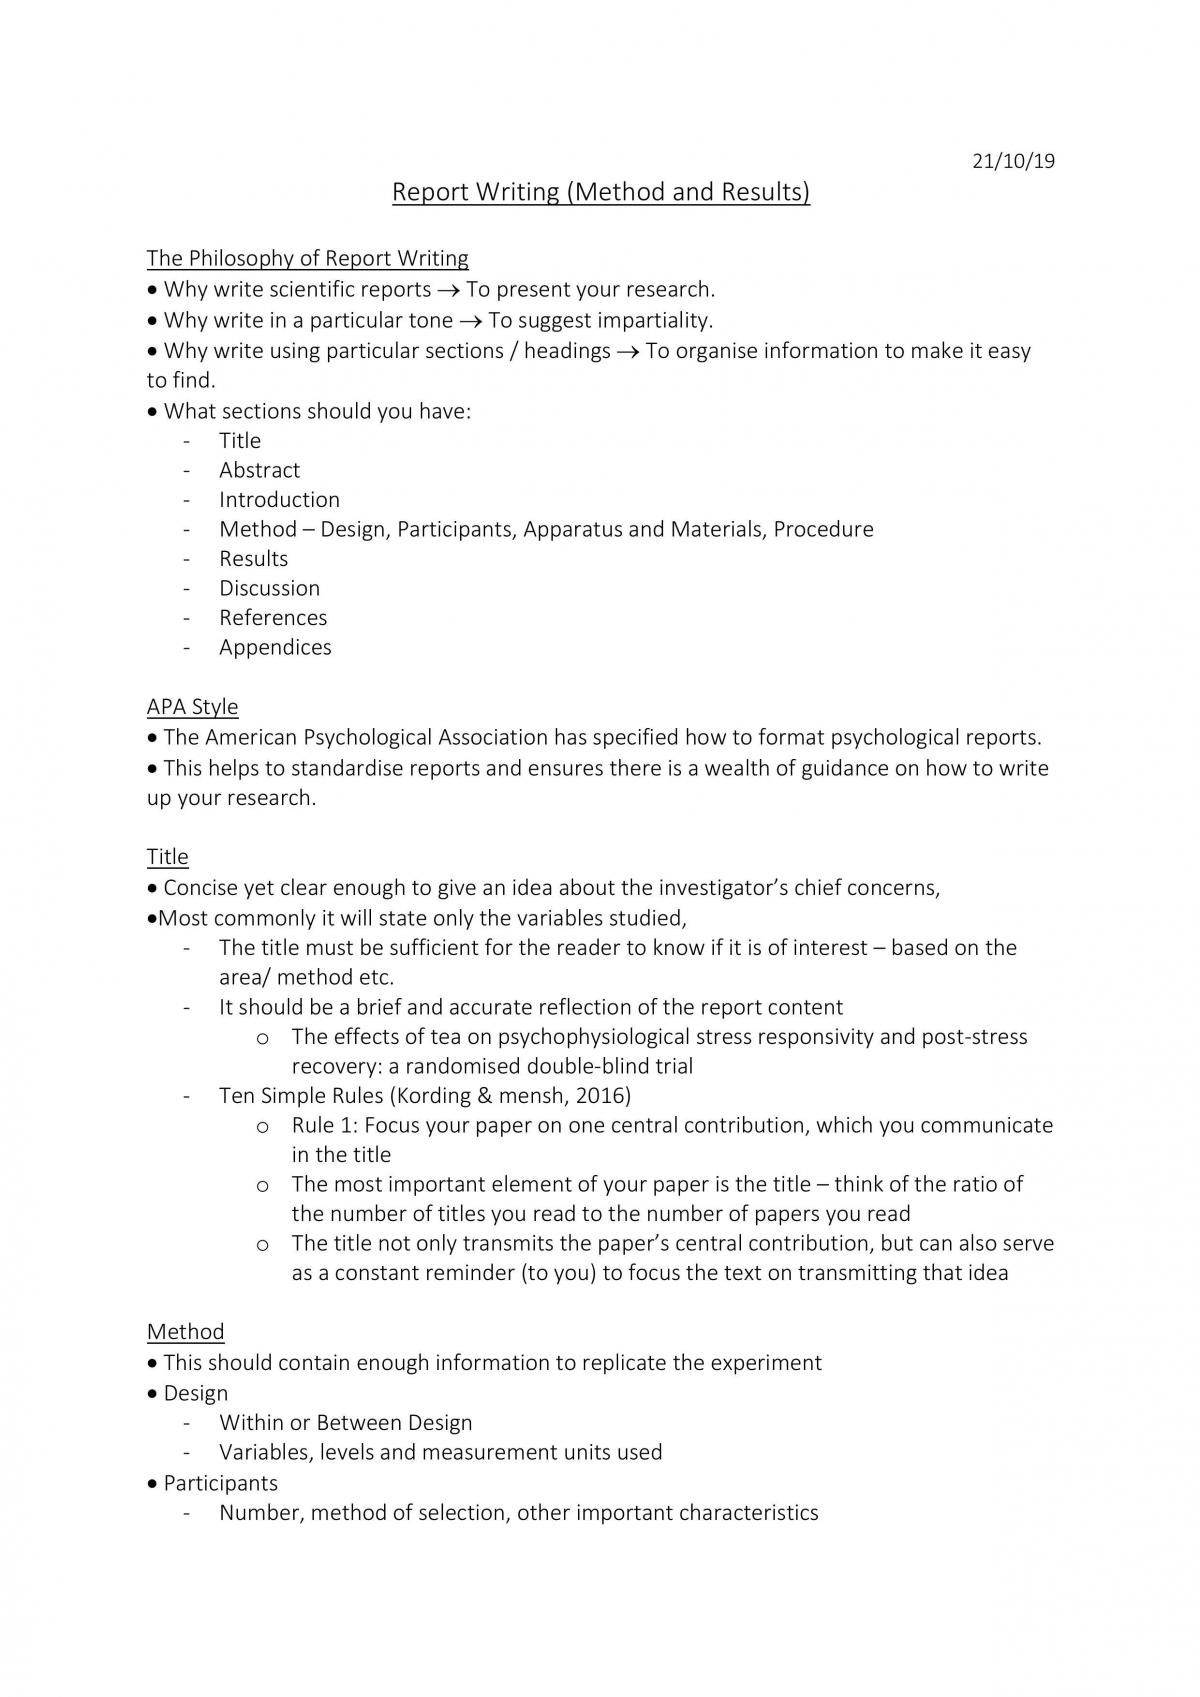 Full Notes of Research, Design, and Analysis  - Page 10